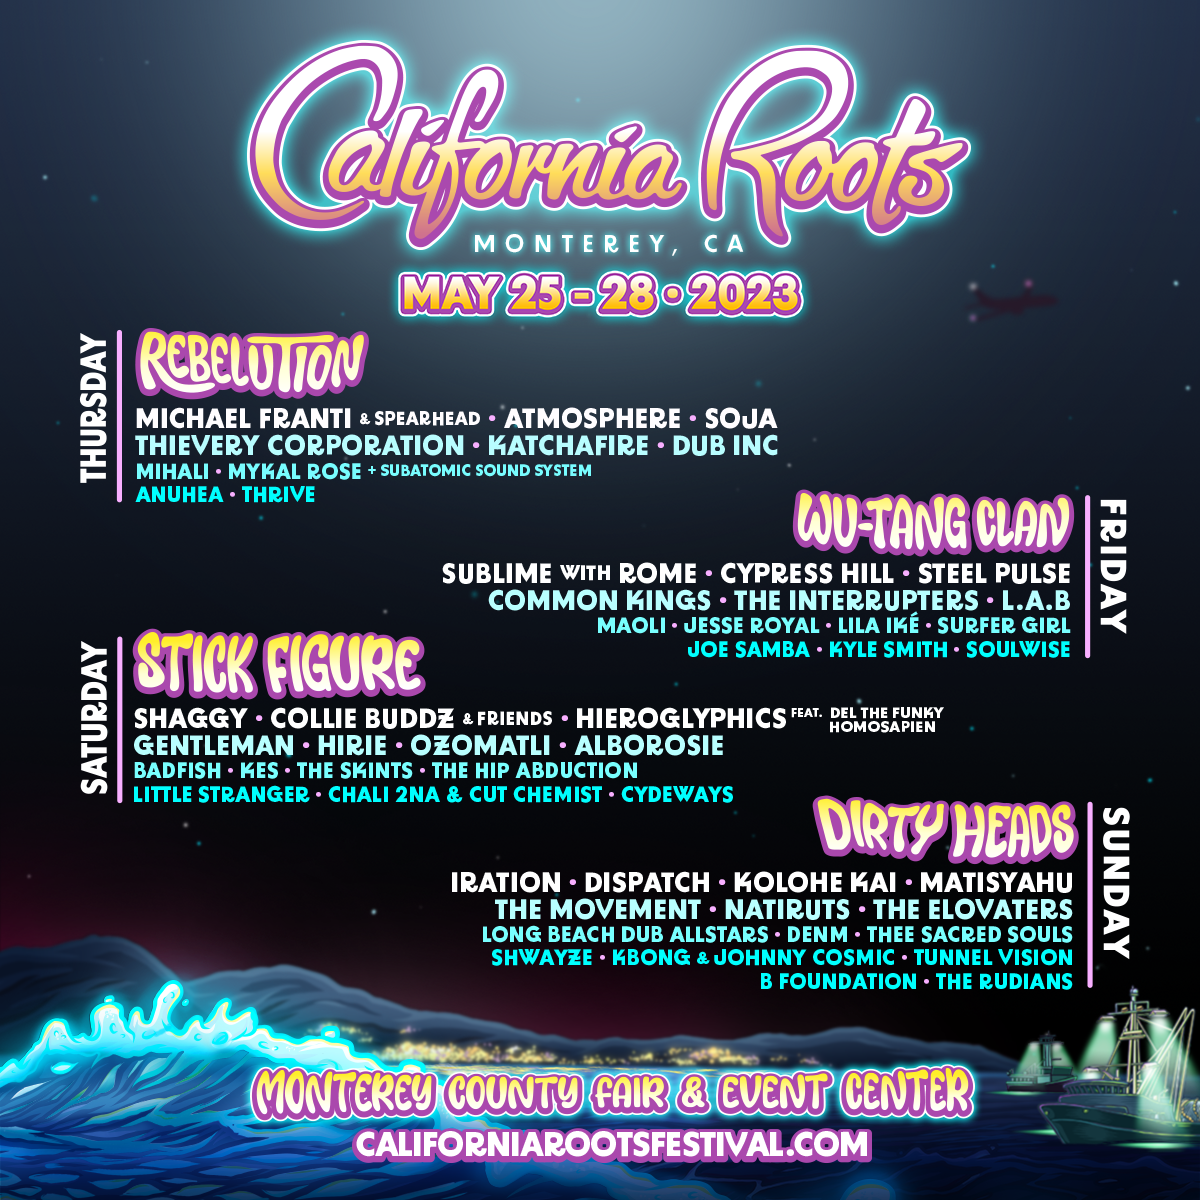 Cali Roots releases amazing 2023 lineup featuring fan favorites like